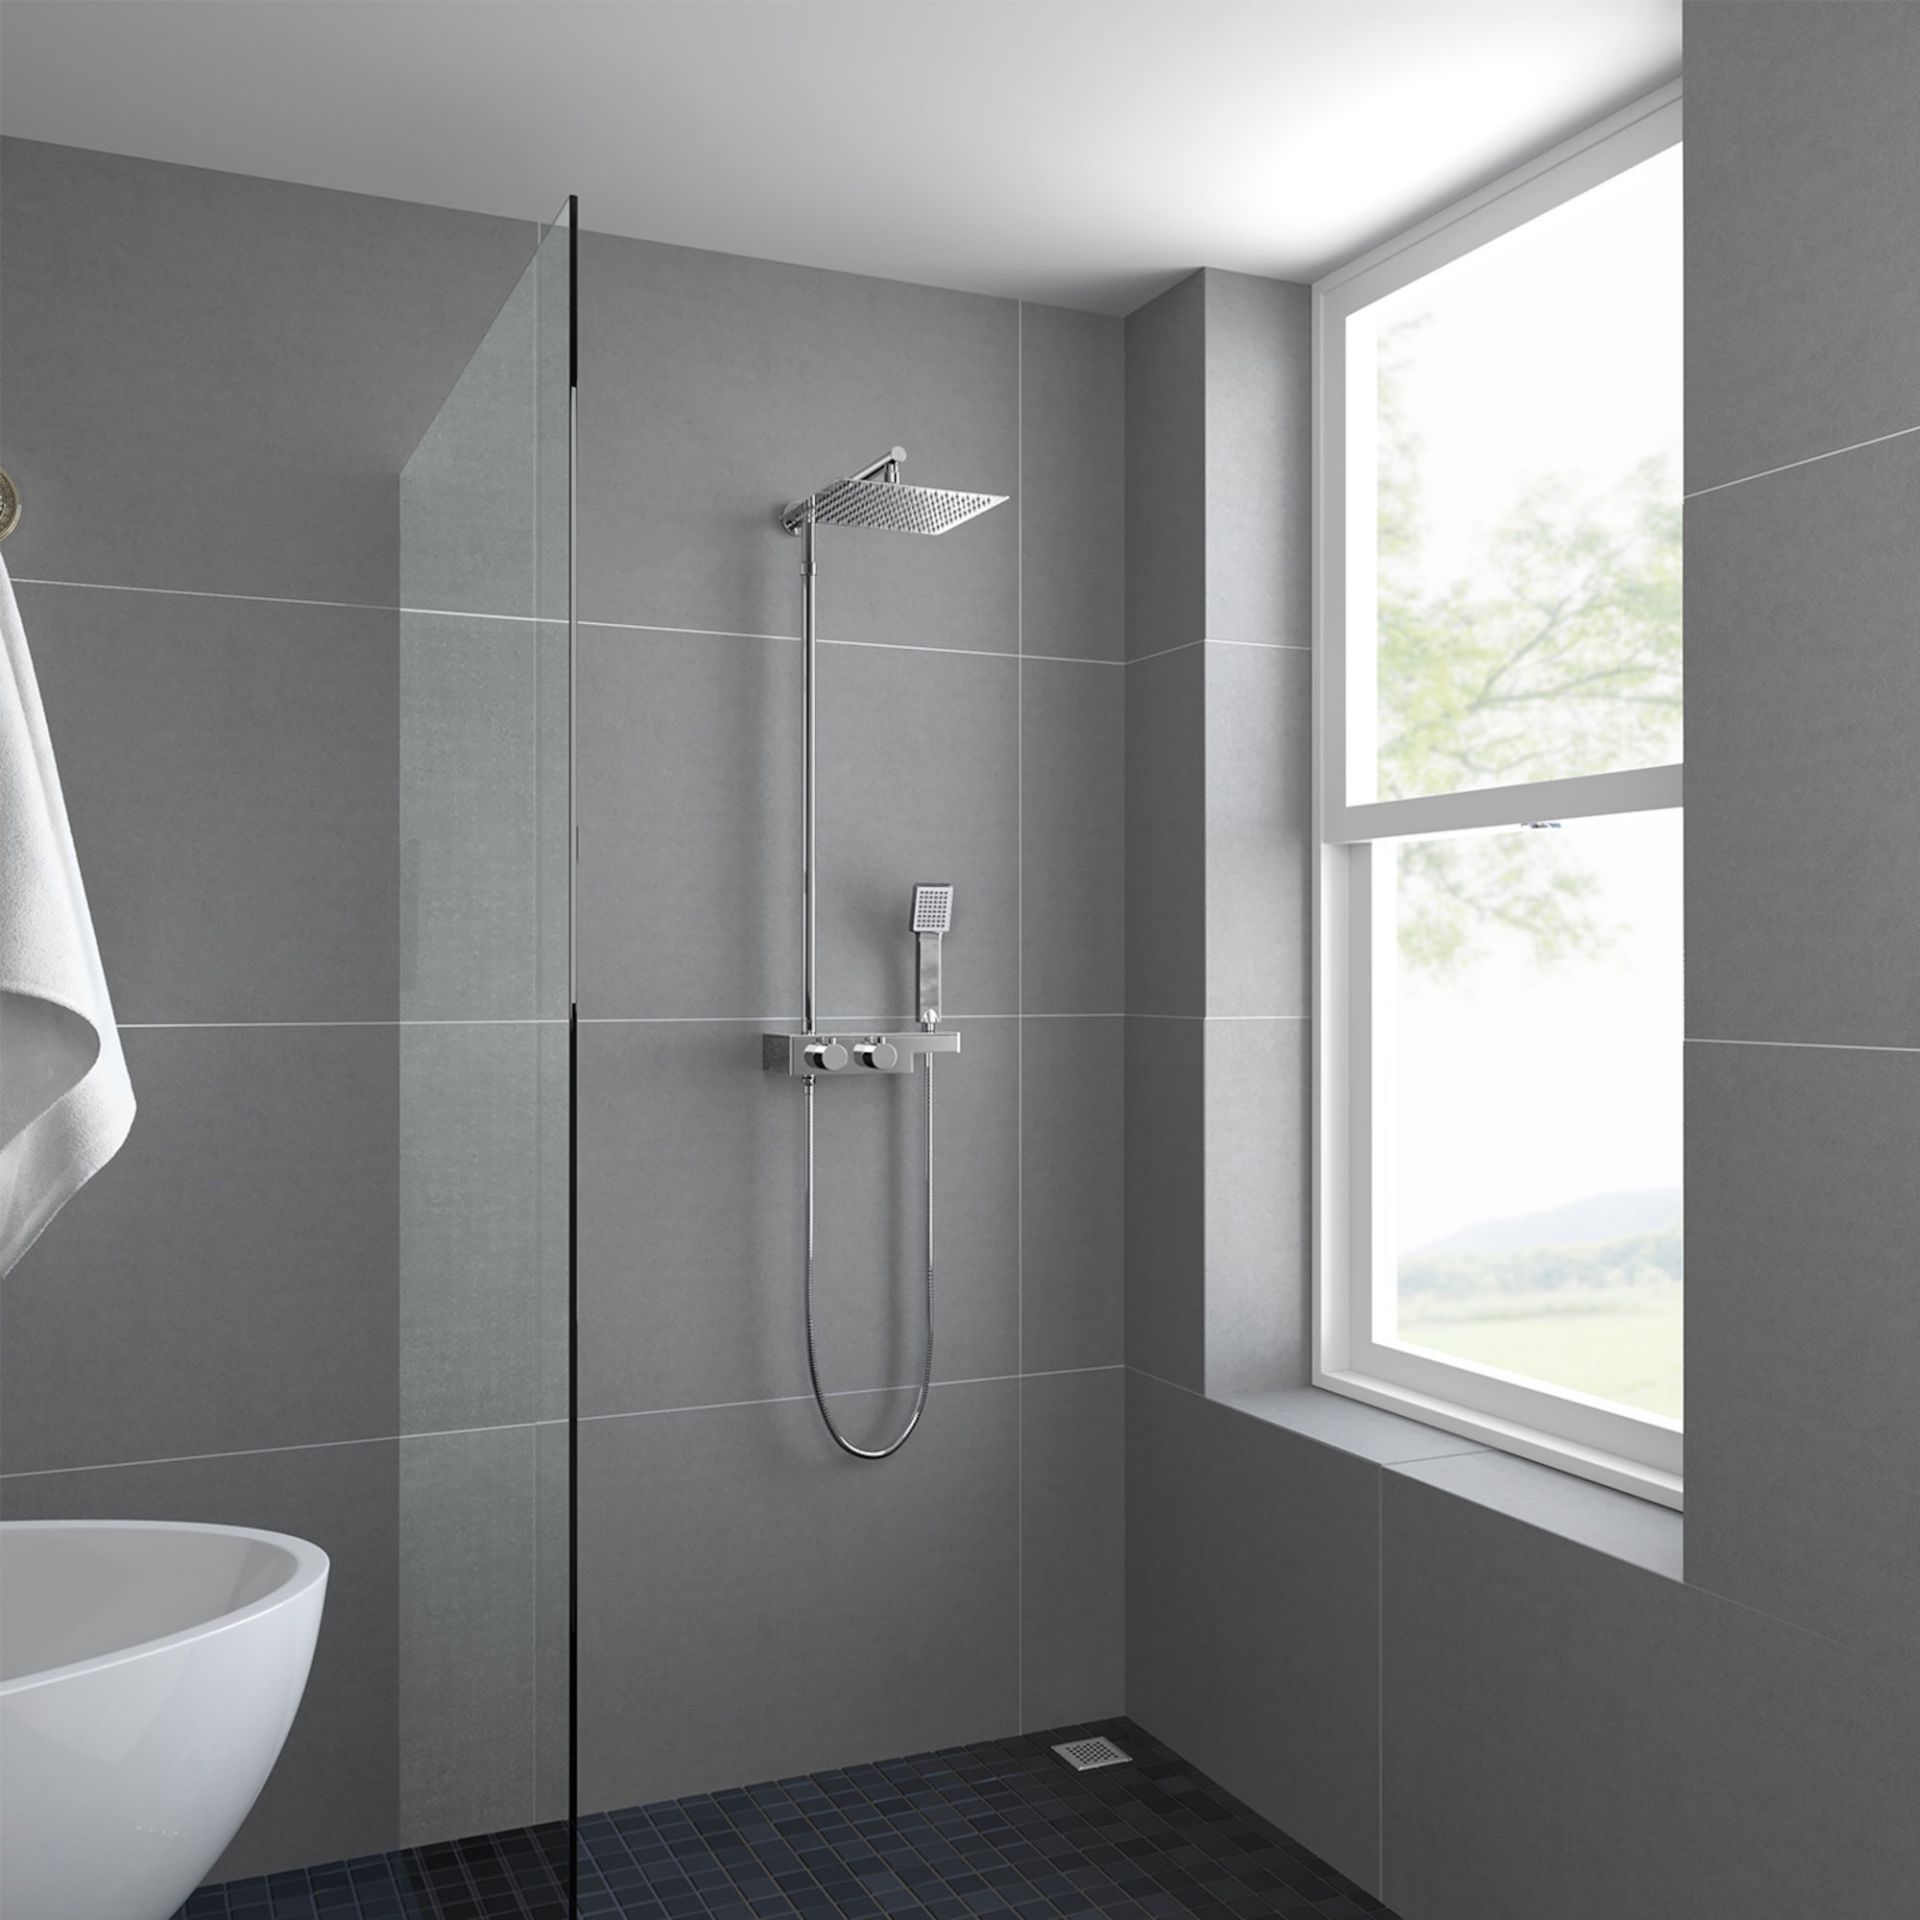 (ZL209) Square Exposed Thermostatic Shower Shelf, Kit & Large Head. RRP £349.99. Style meets - Image 4 of 4